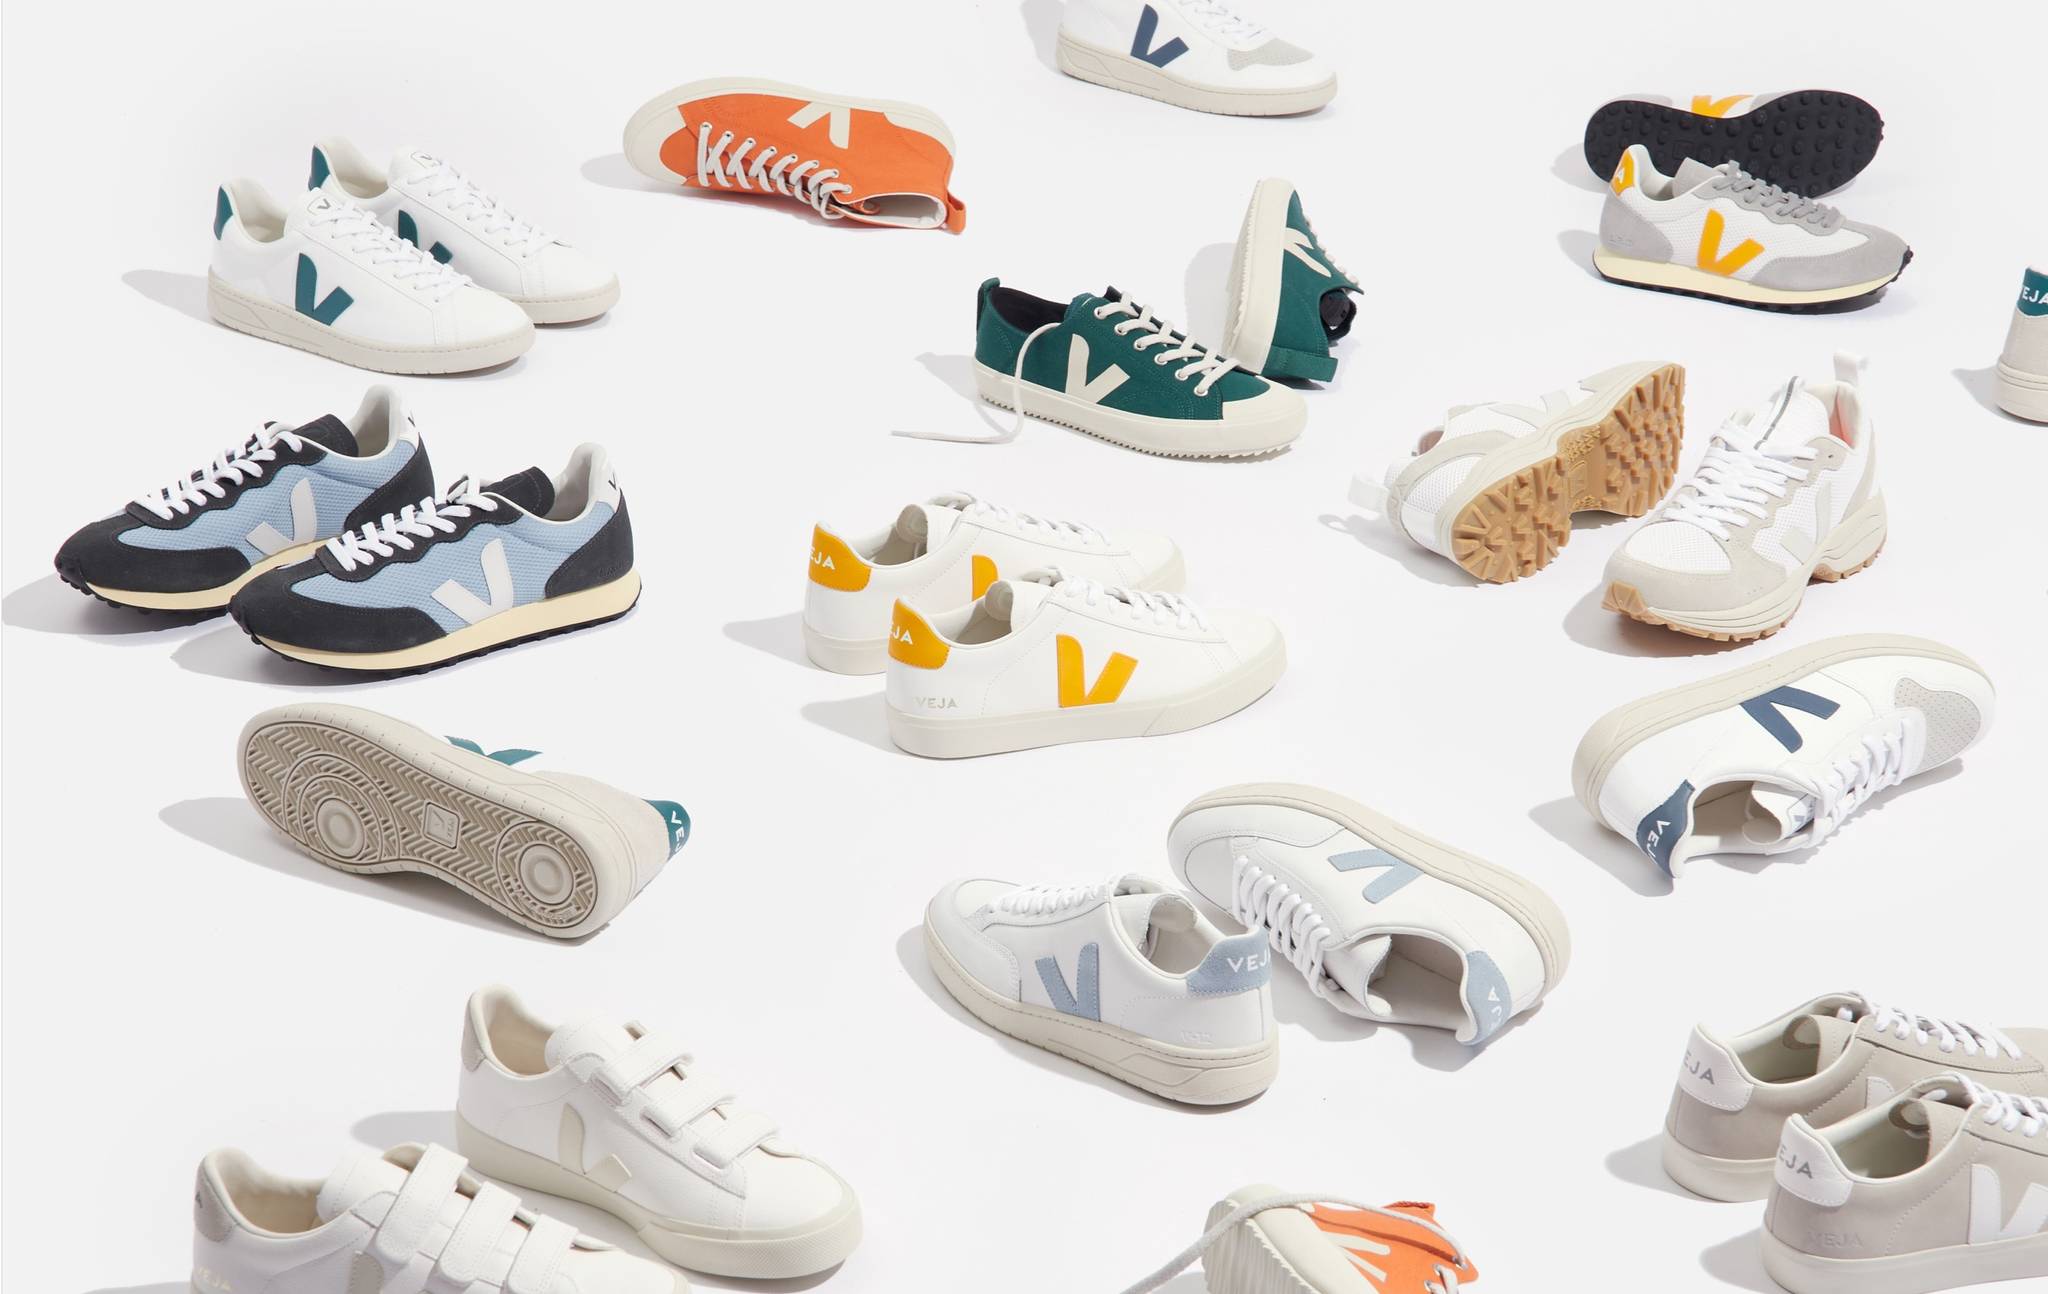 Veja sneakers drive sustainable rubber in the Amazon